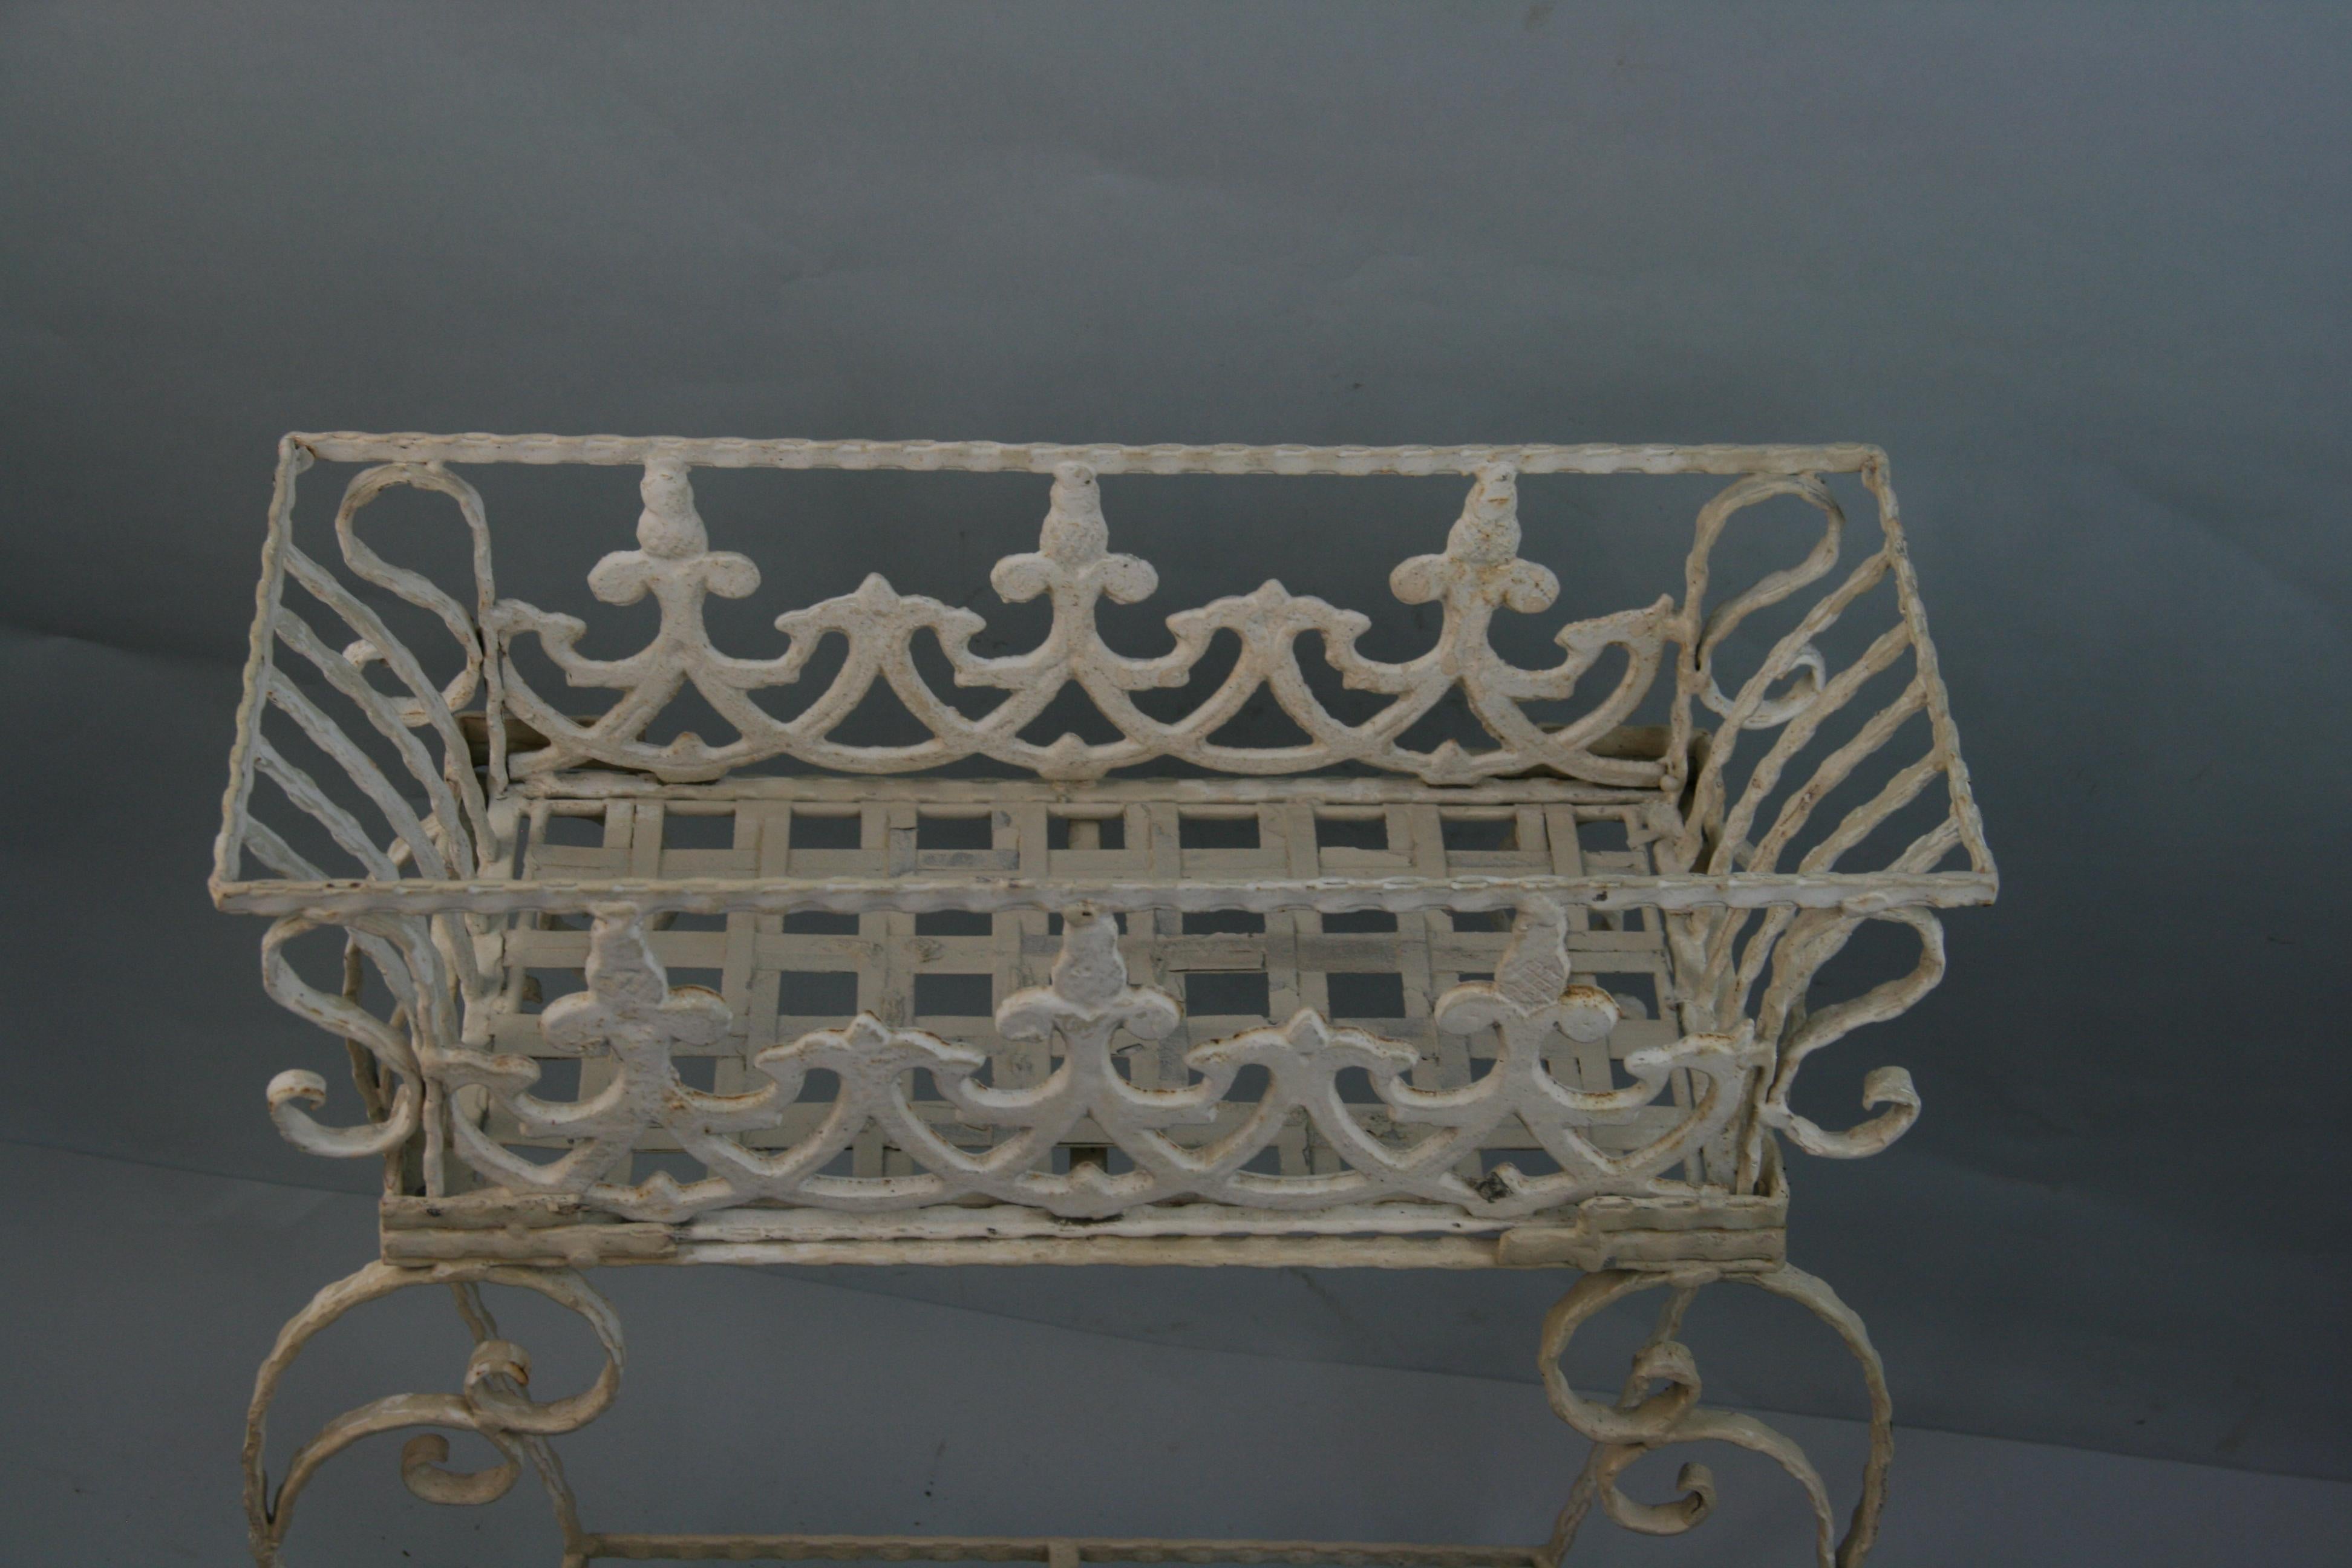 Iron Decorative Two Level Garden Plant Stand In Good Condition For Sale In Douglas Manor, NY